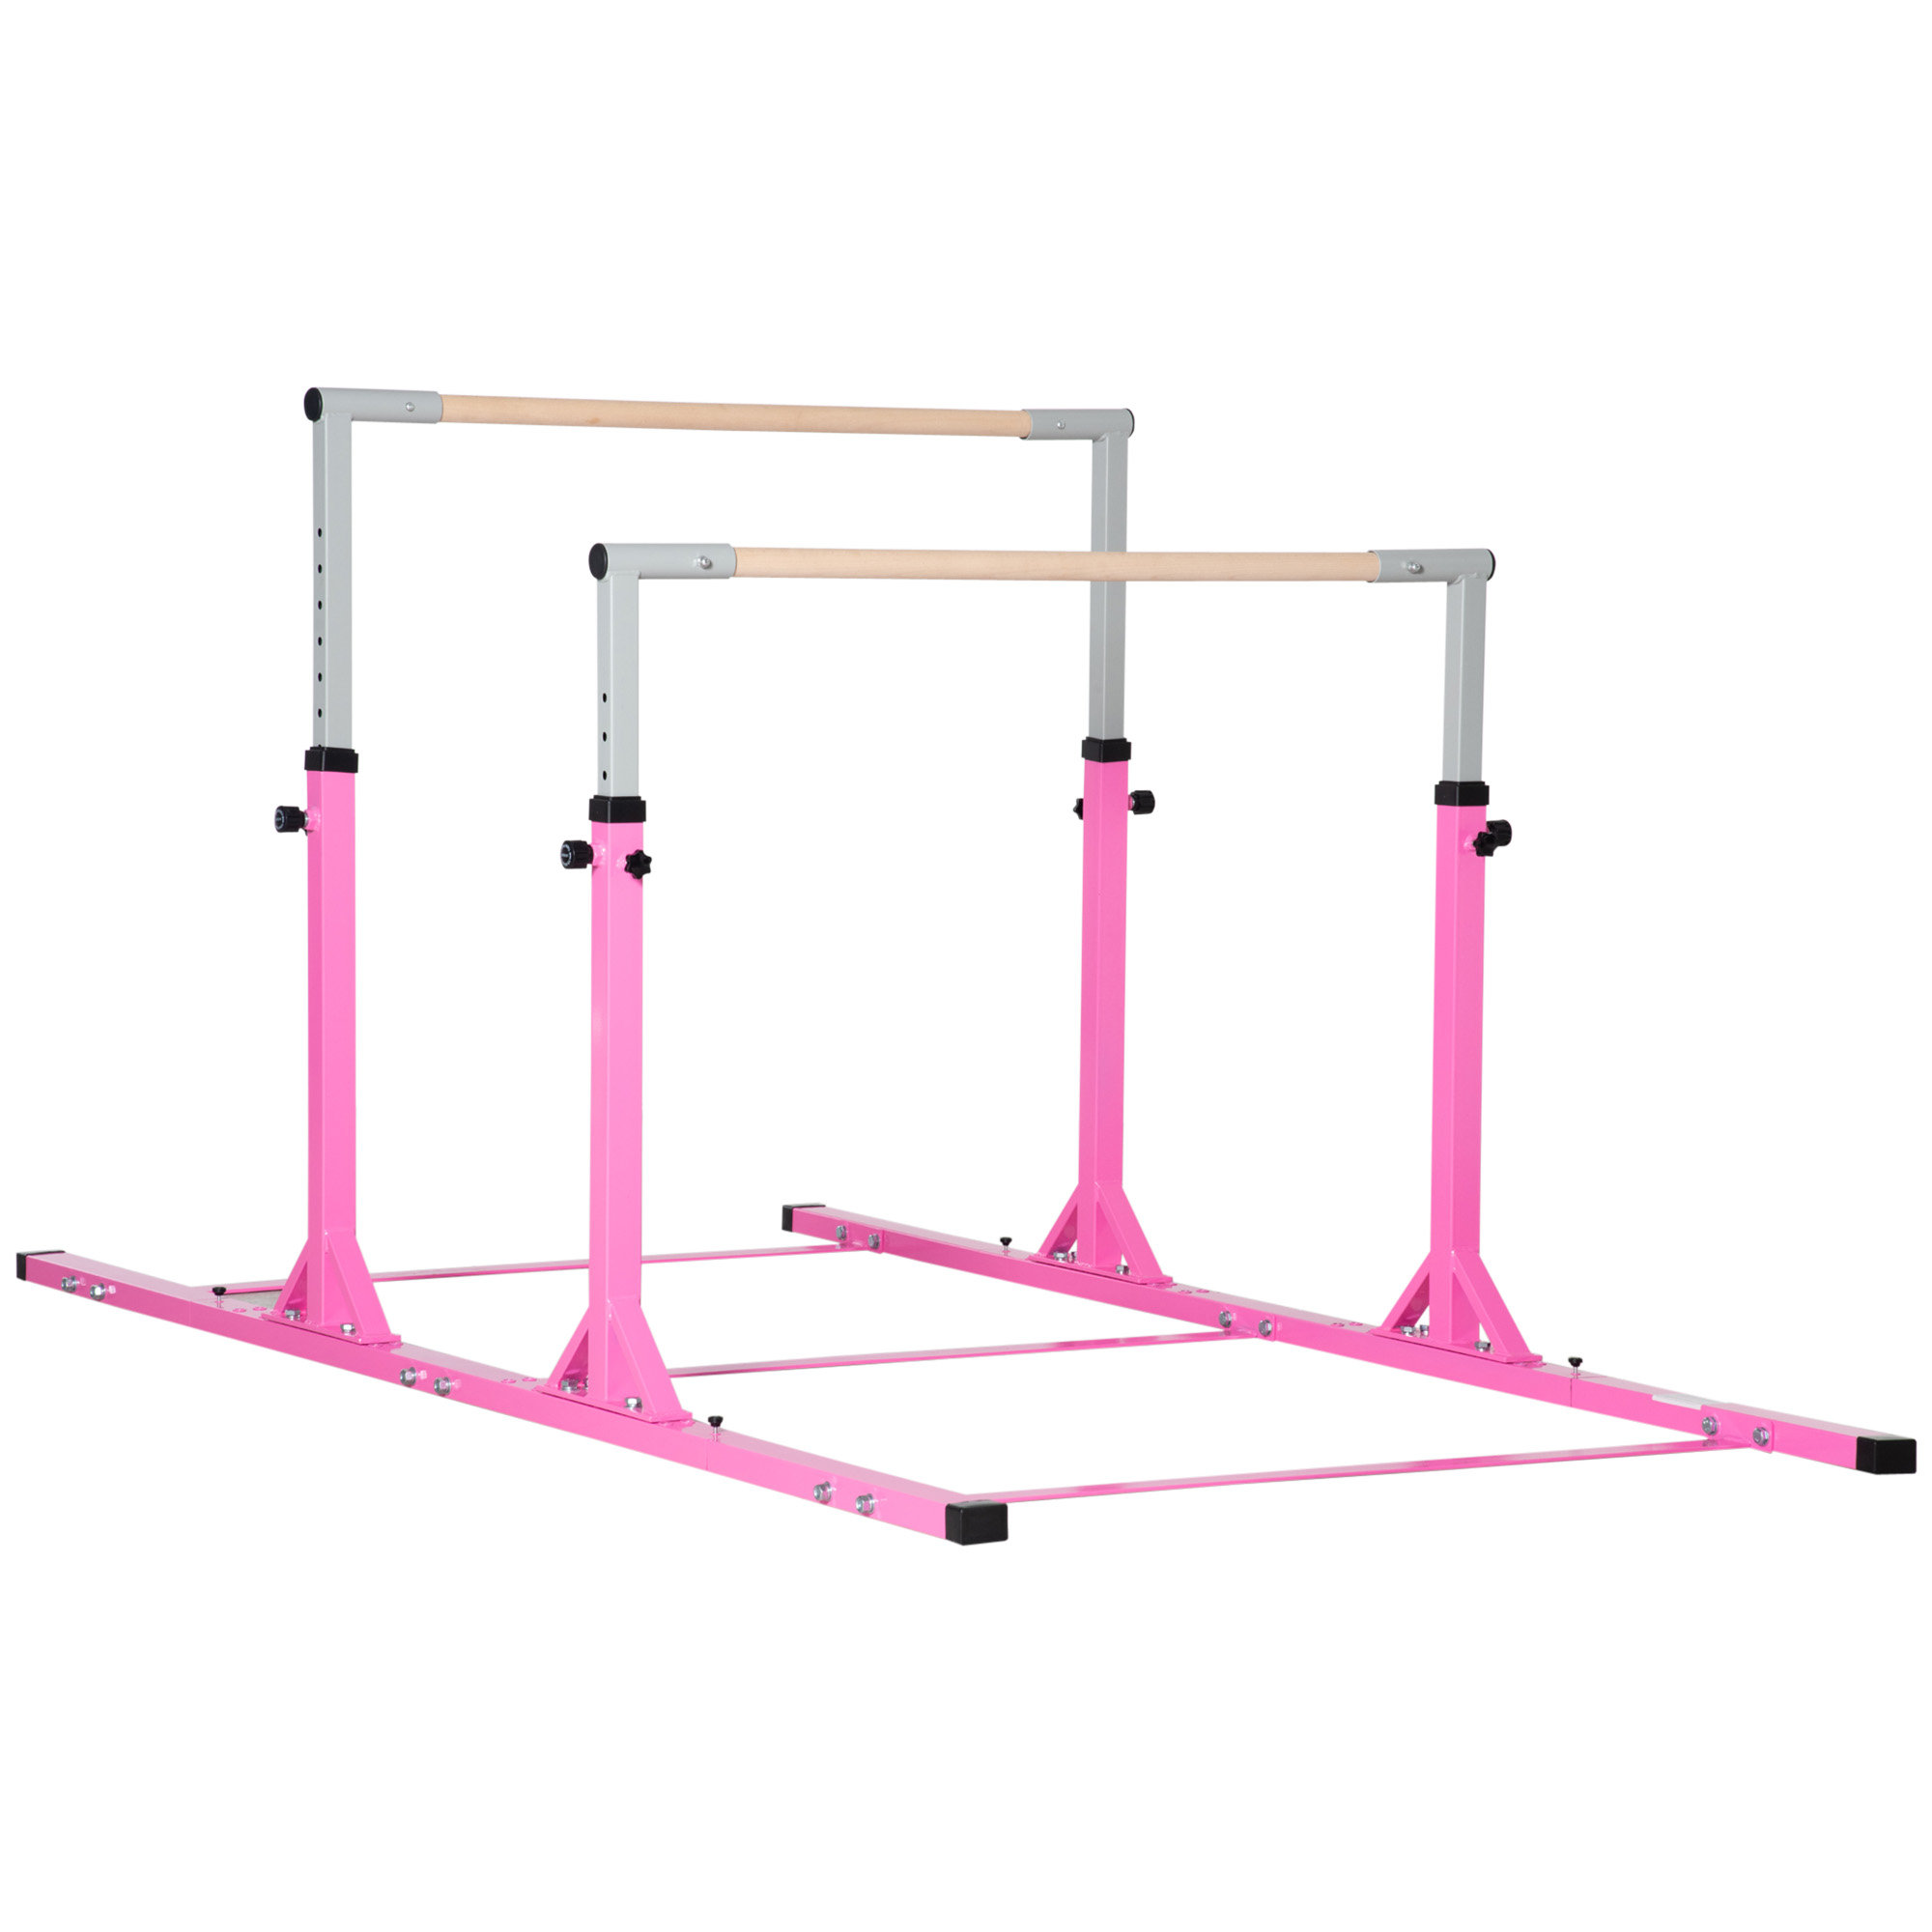 UltraPlay Commercial Monkey Bars for Kids